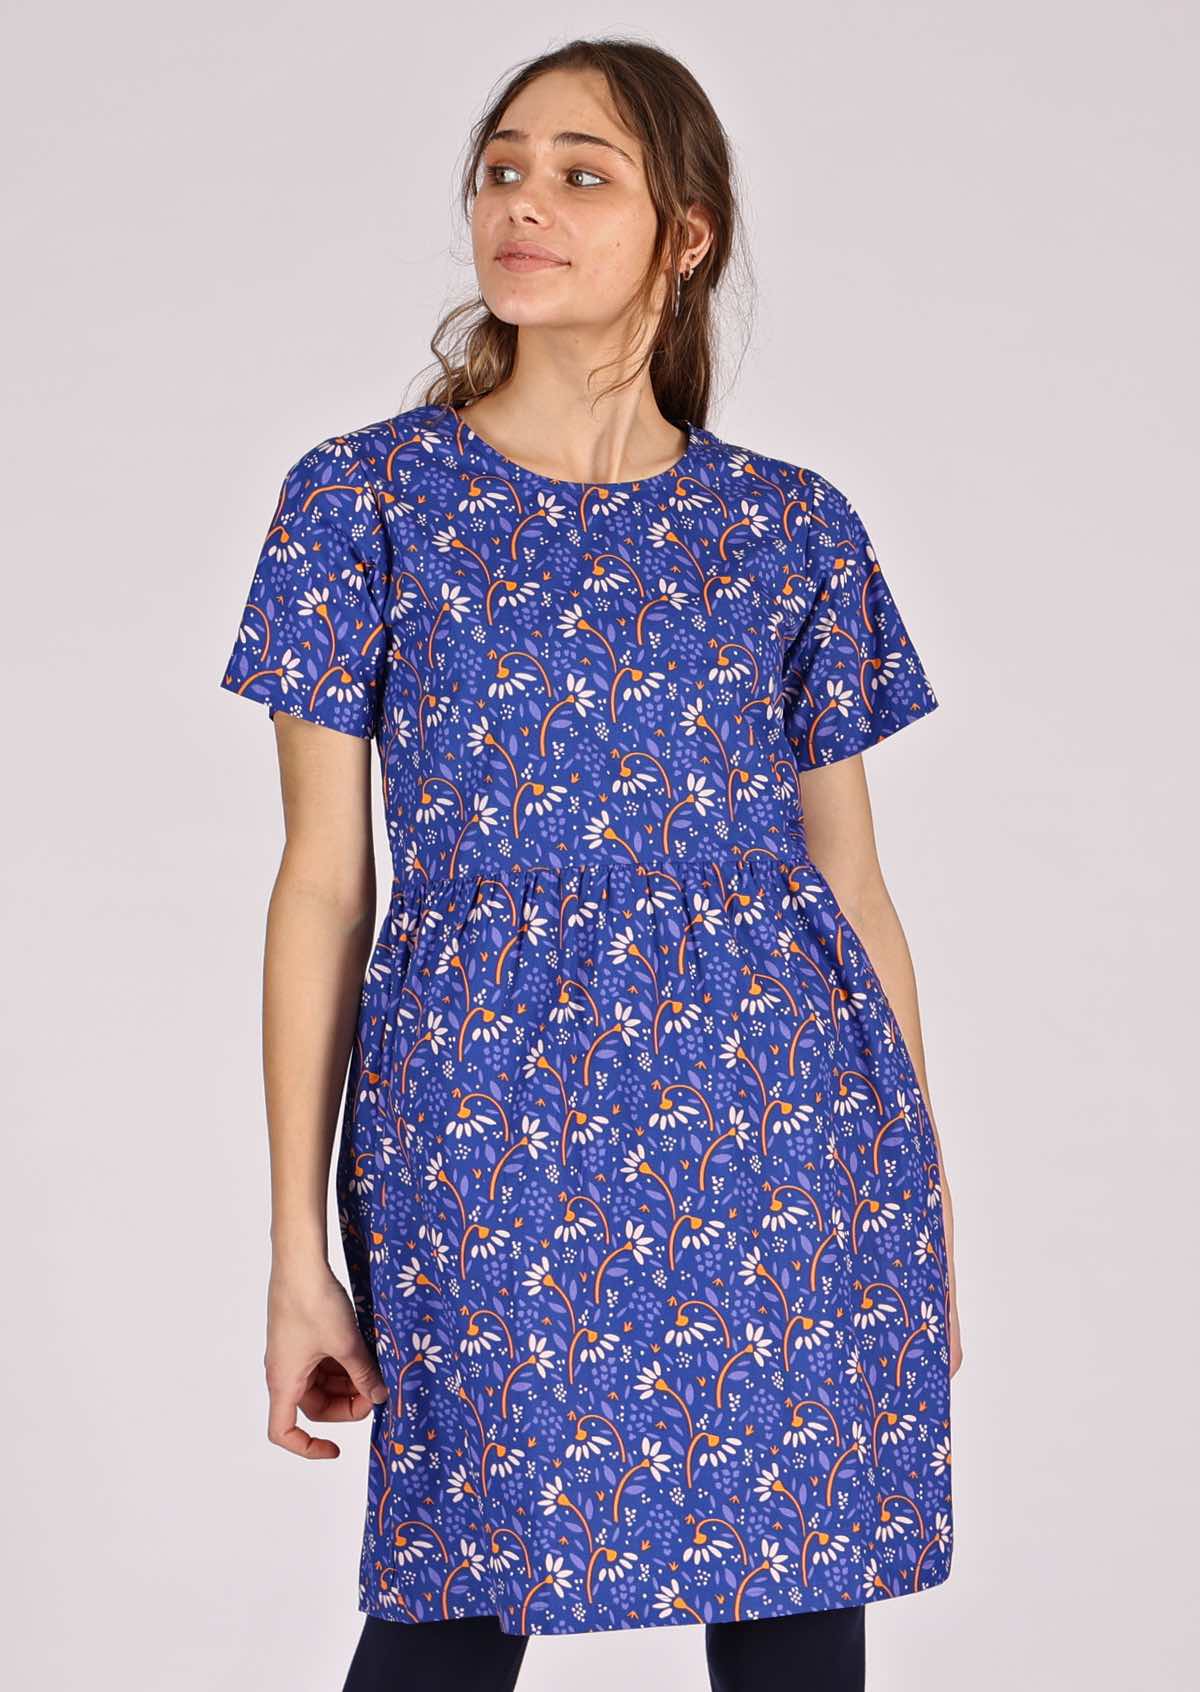 Relaxed fit cotton dress with fun daisy print